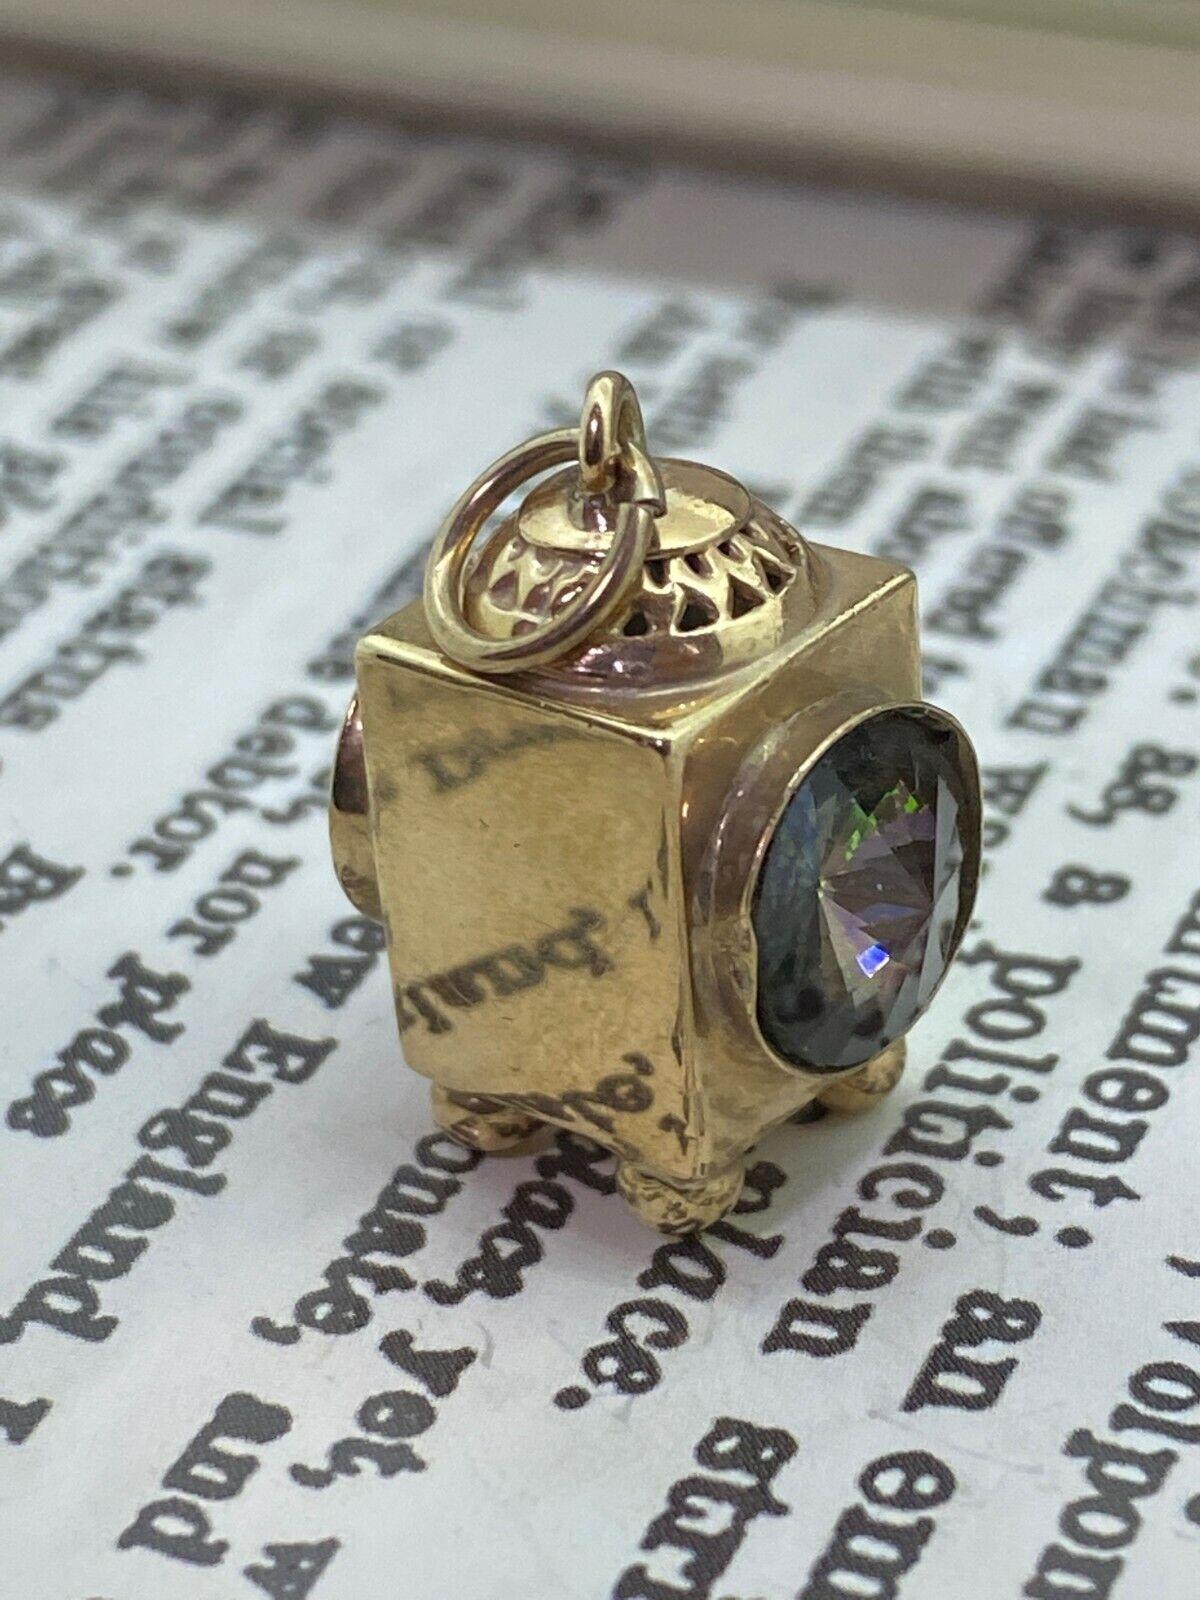 Intricately designed as a Old Lantern 
Set with a smoky quartz from each side - creating an illusion of beaming light from inside 
& finely detailed at the top 

This exquisite charm is crafted in 9K yellow gold, 
bearing English hallmarks (crown &